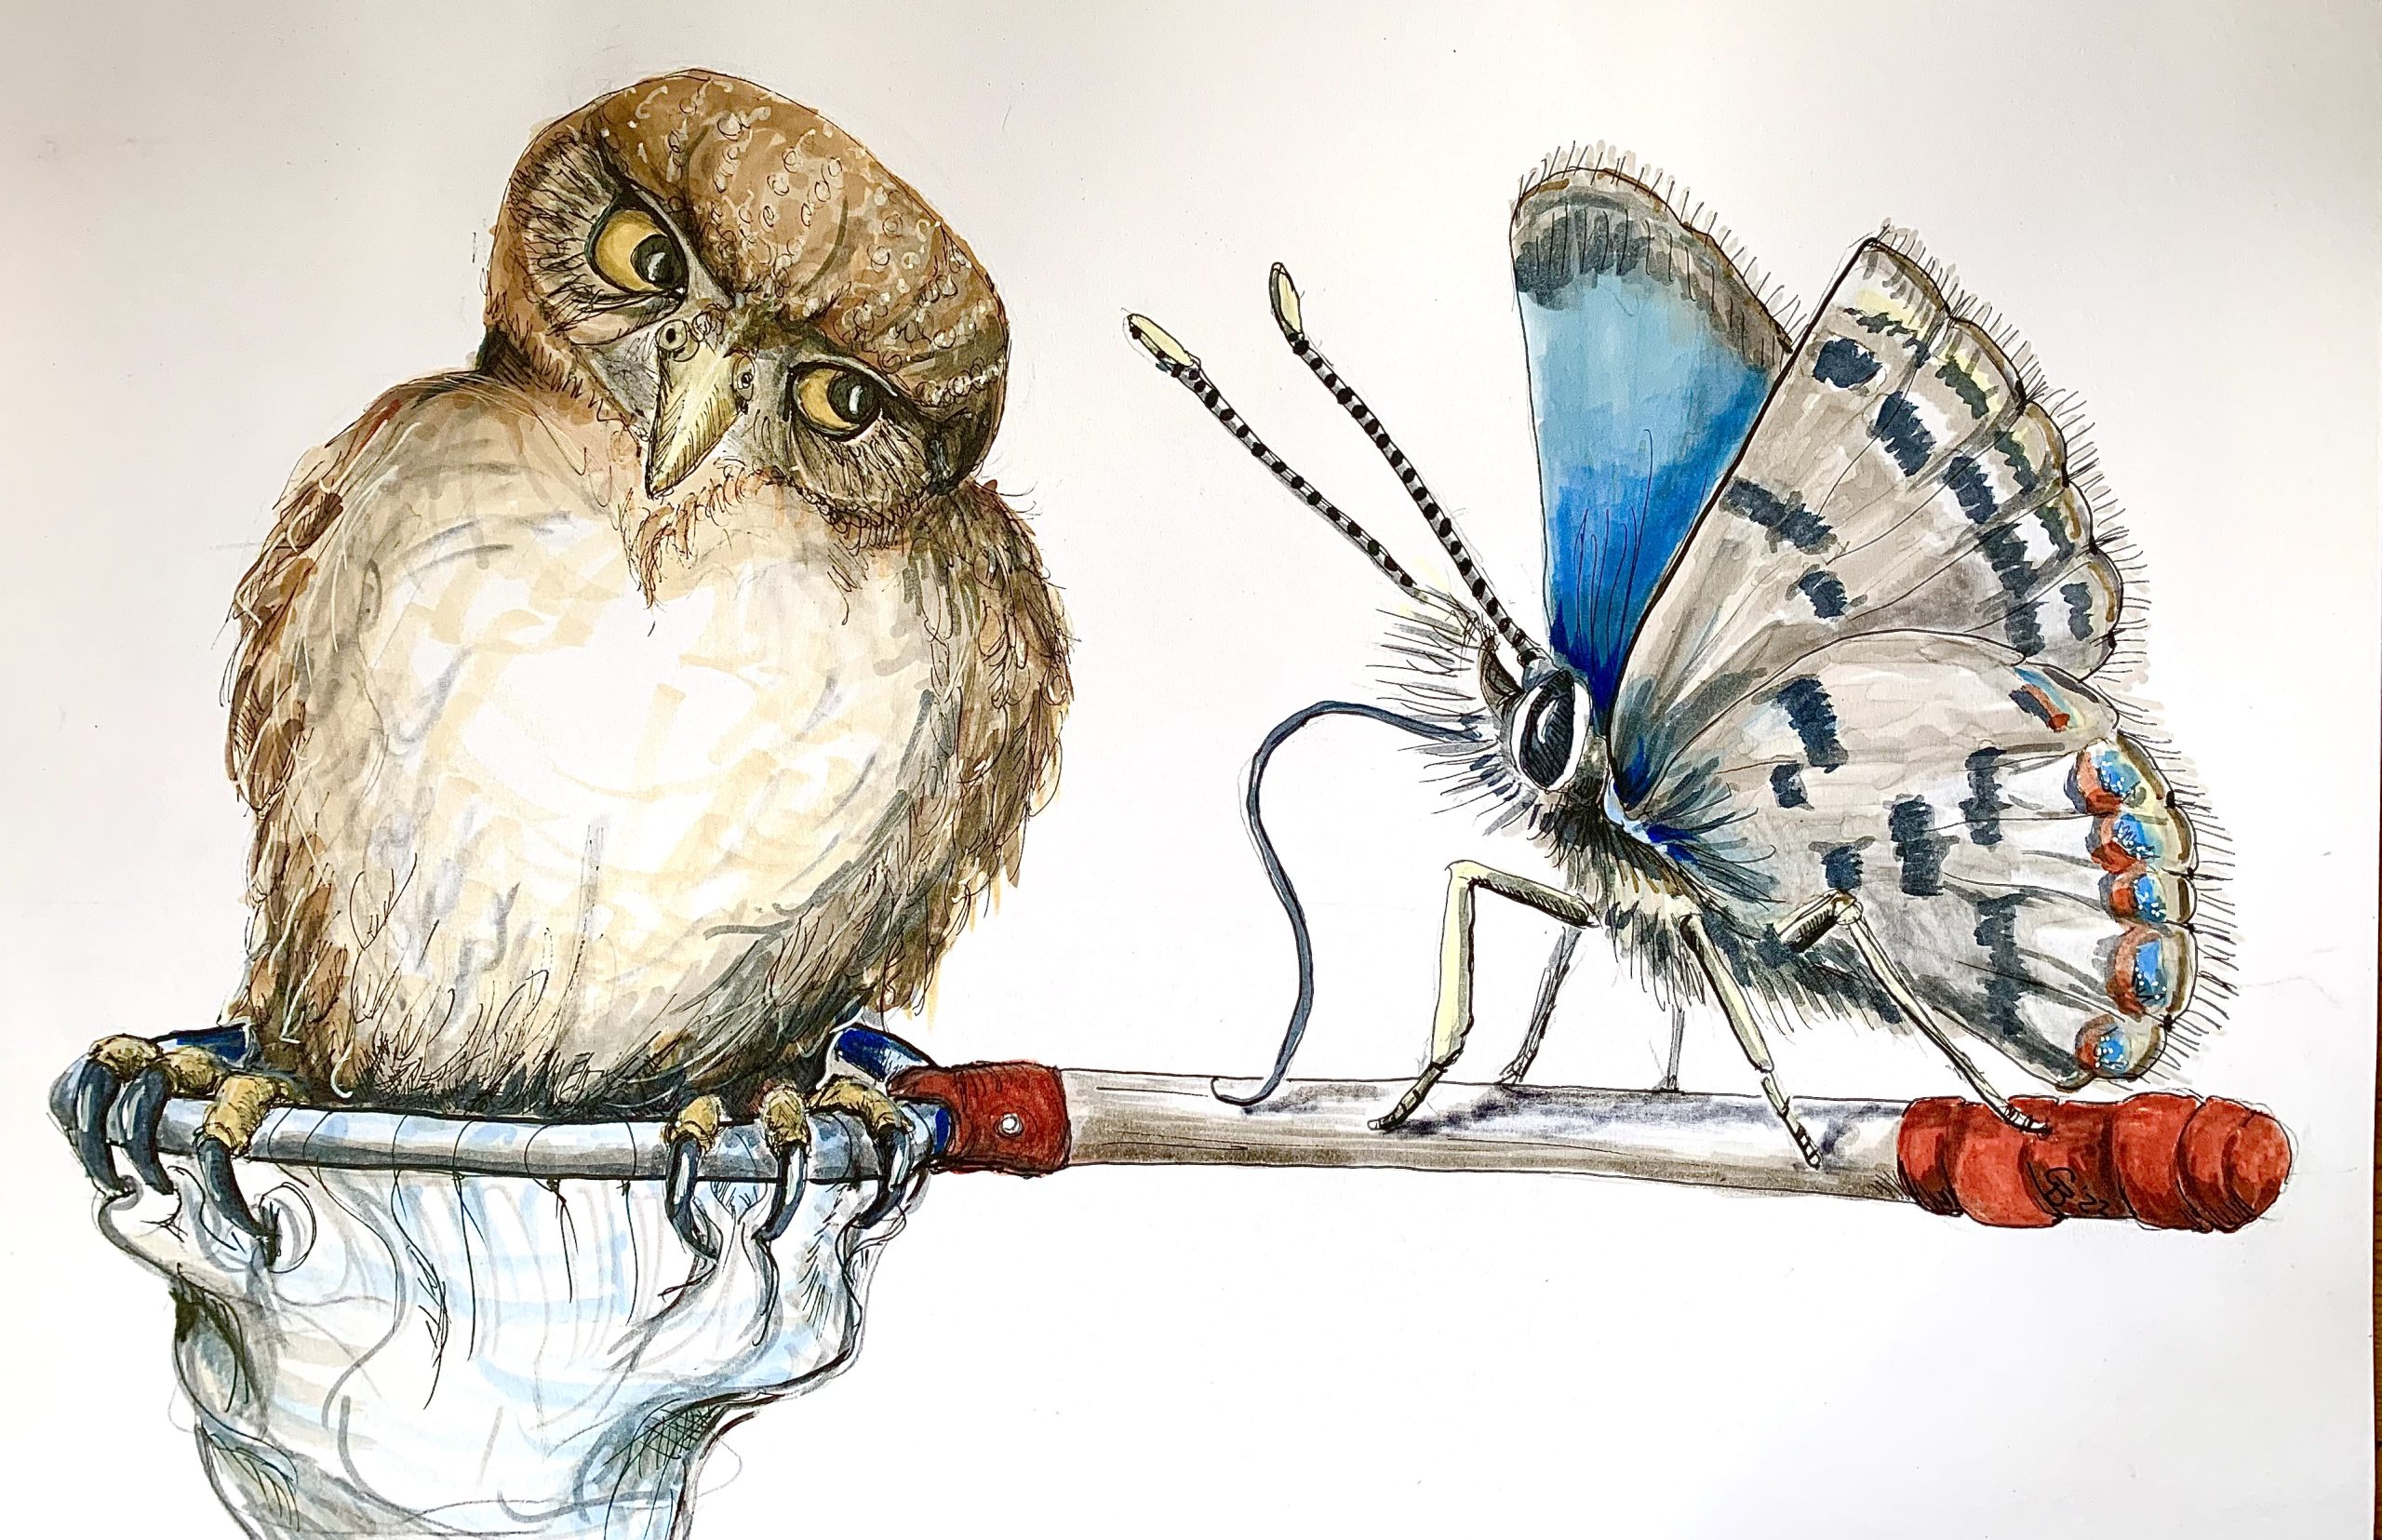 Original artwork from the Pollinator Hotshot project on public engagement with parks depicts a large brown owl and a blue striped moth sitting side by side atop a net.